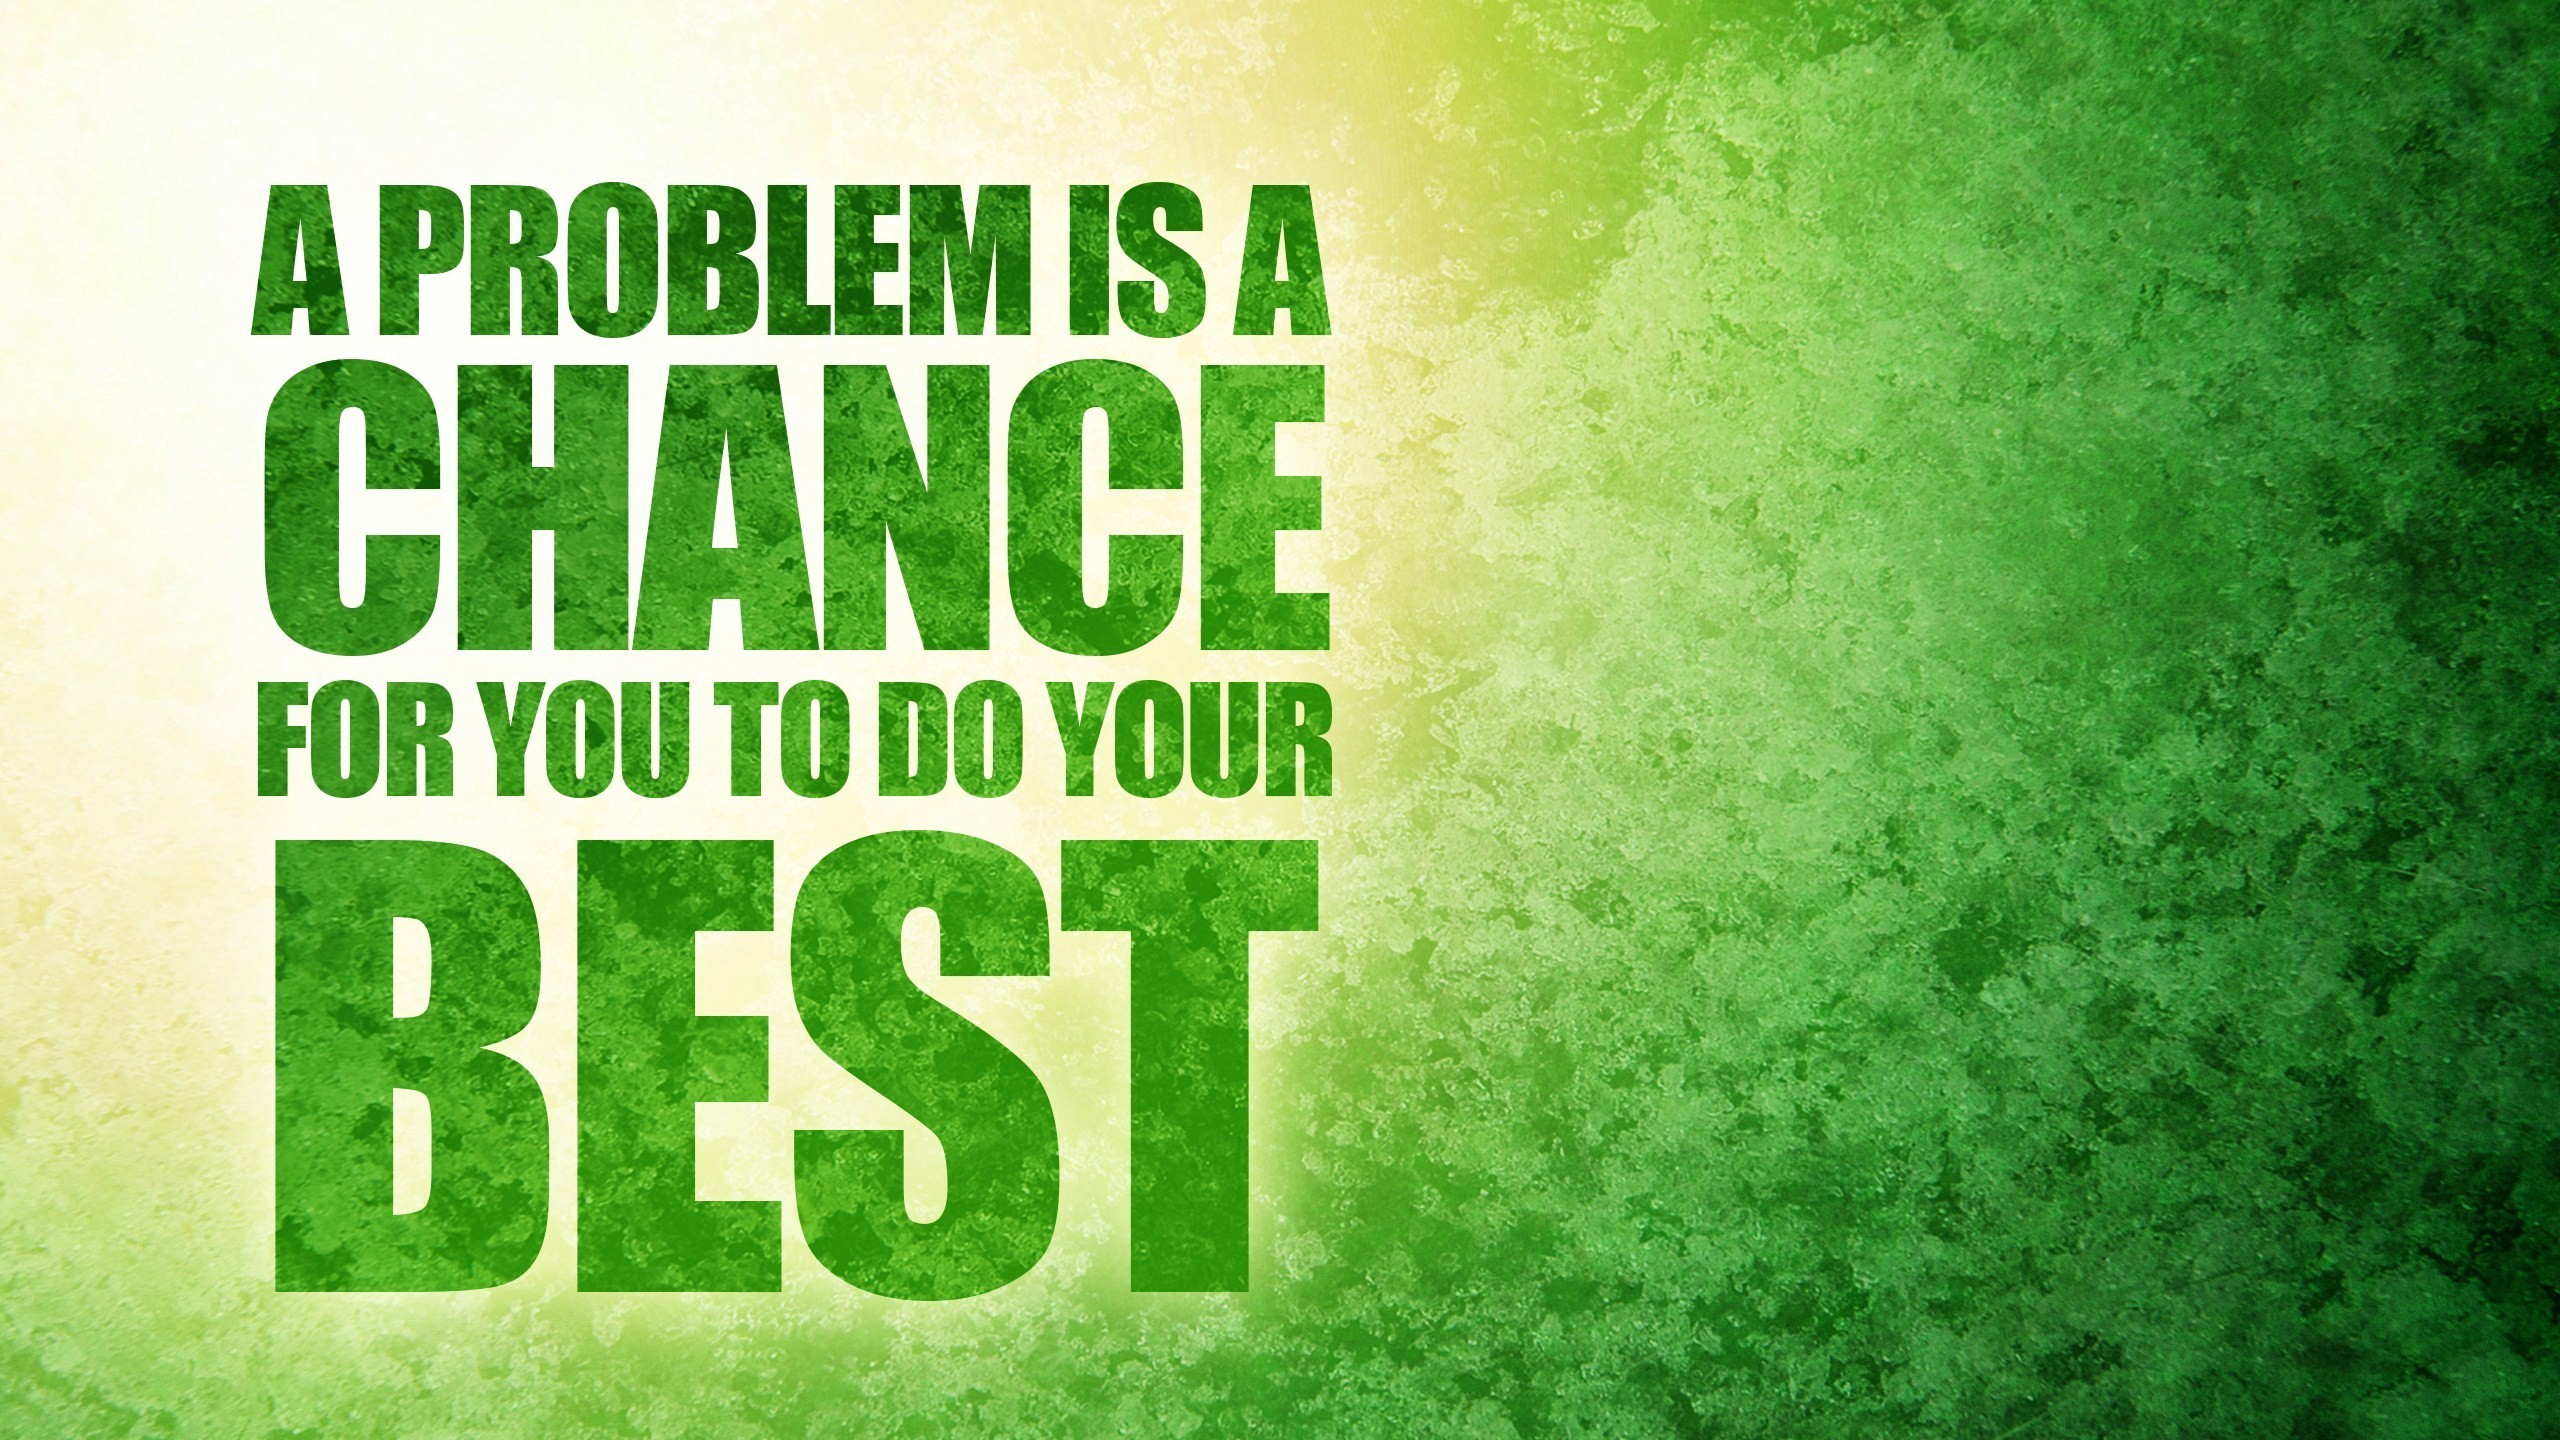 Best Chance Quotes Wallpaper - All The Best - 2560x1440 Wallpaper -  